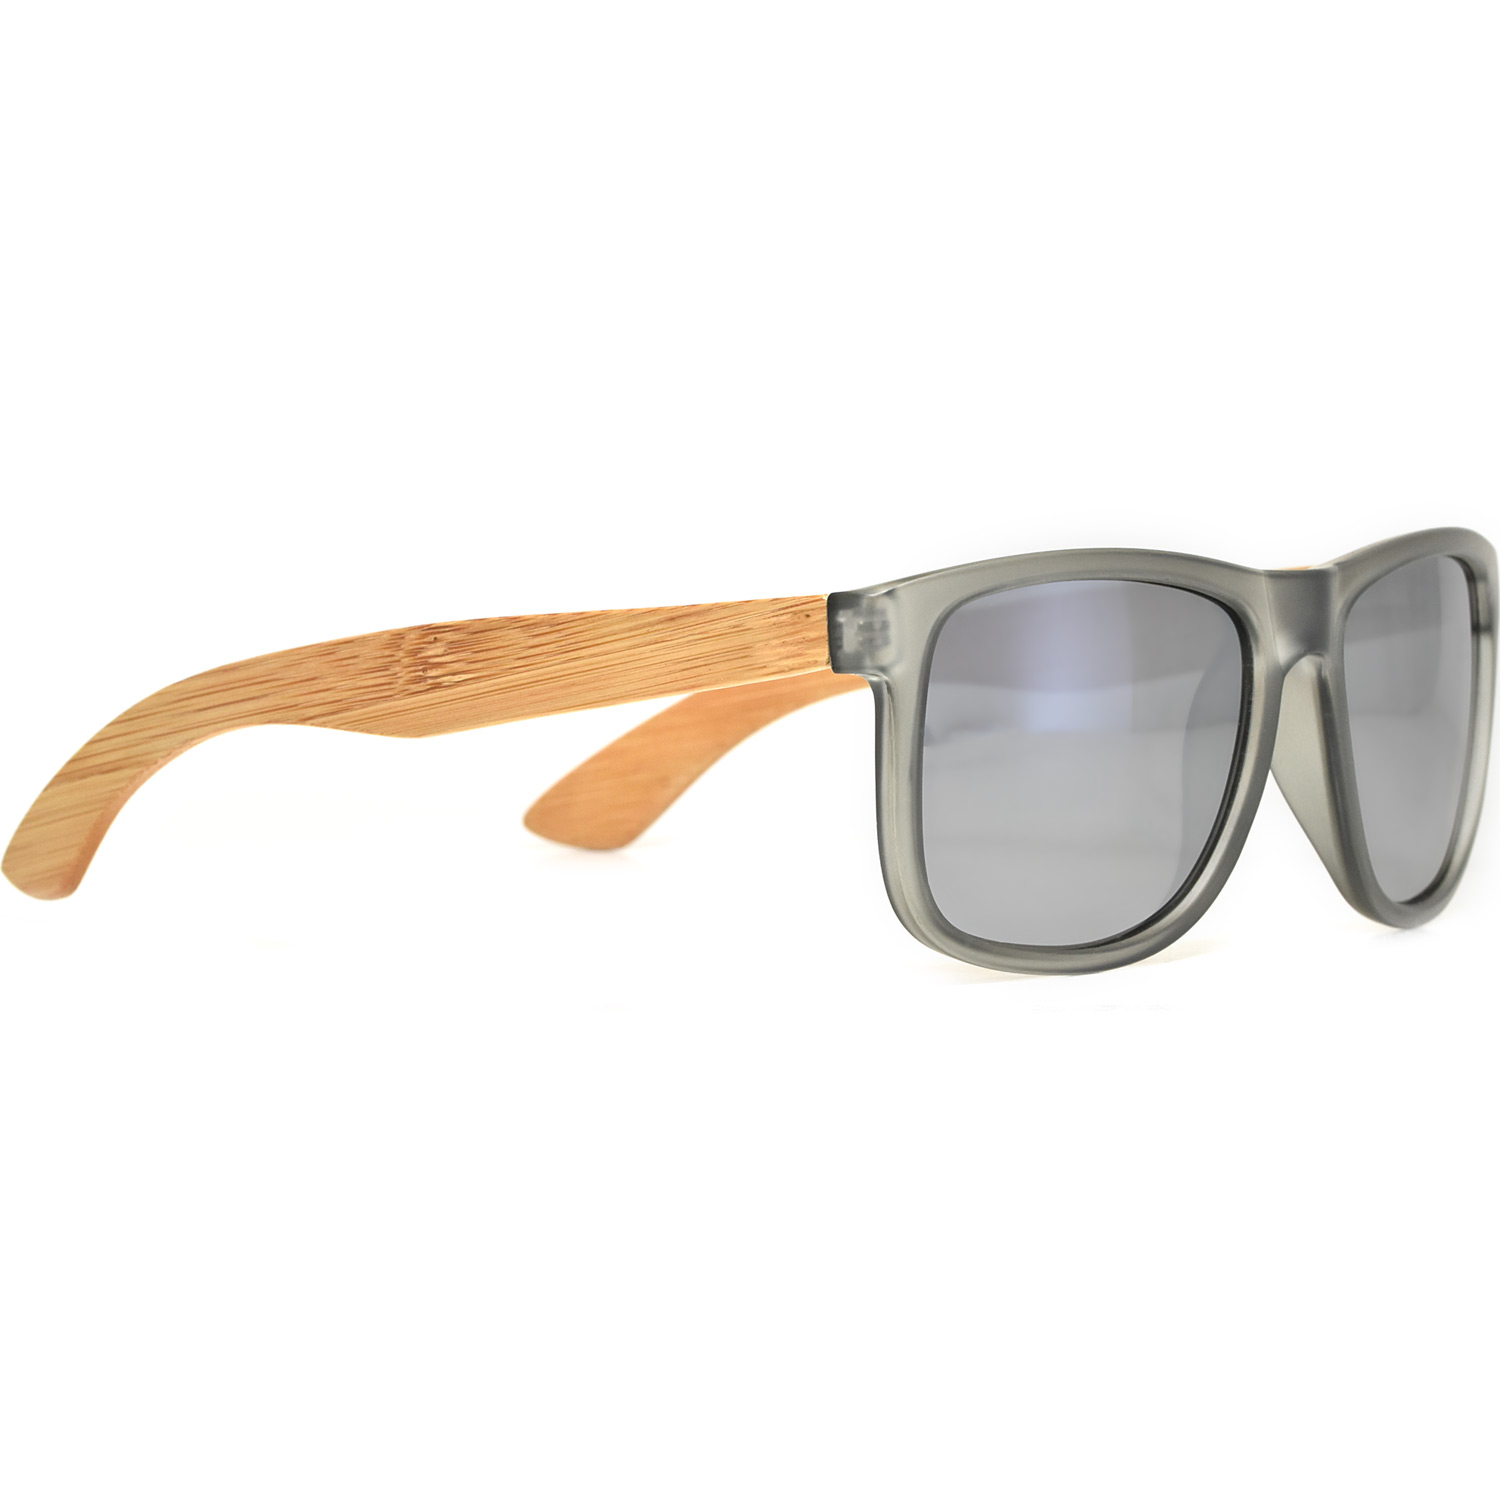 Square bamboo wood sunglasses silver mirrored polarized lenses acetate right